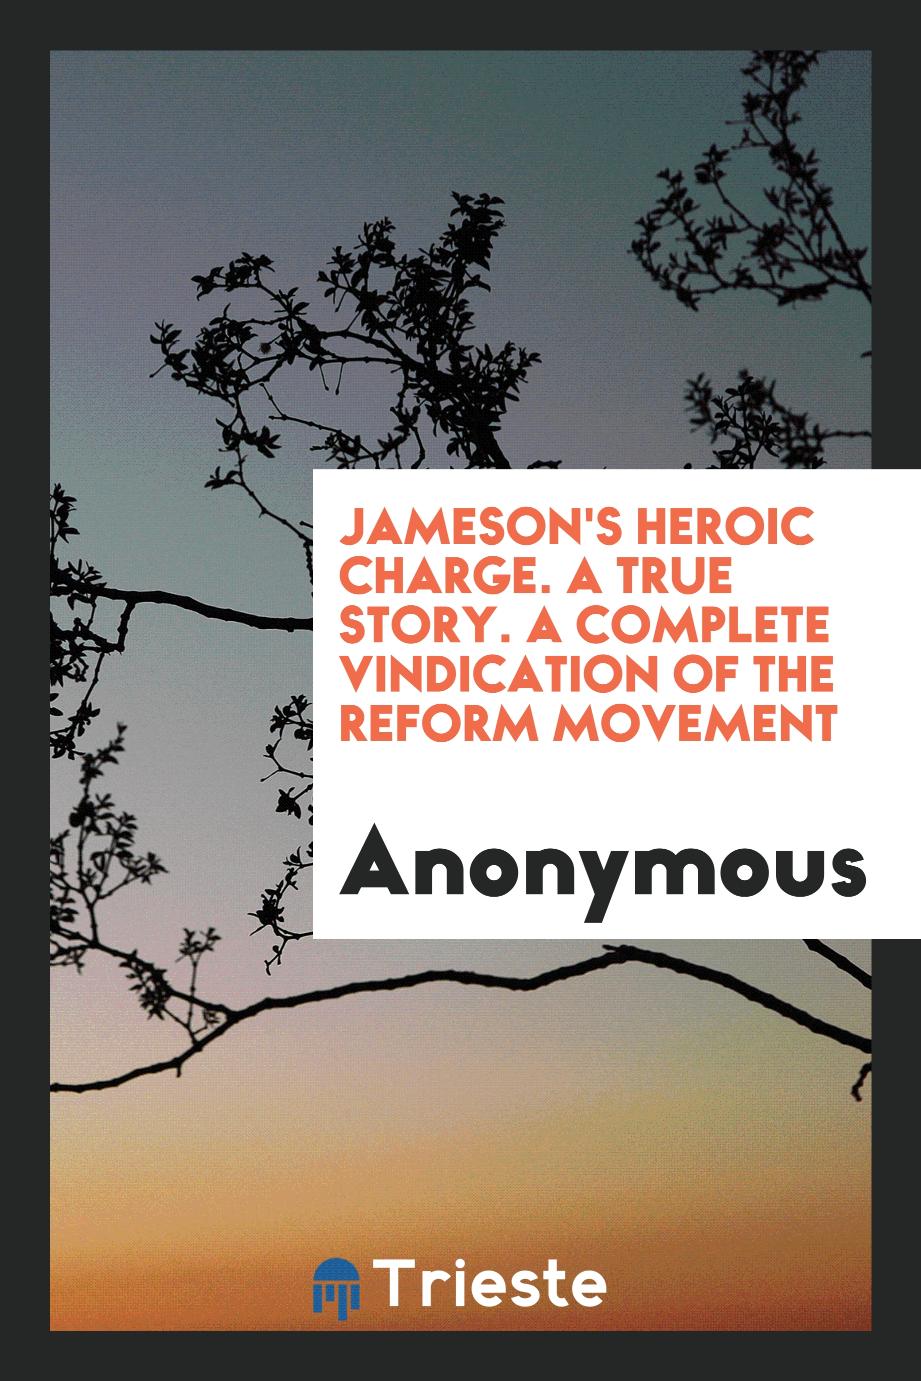 Jameson's Heroic Charge. A True Story. A Complete Vindication of the Reform Movement